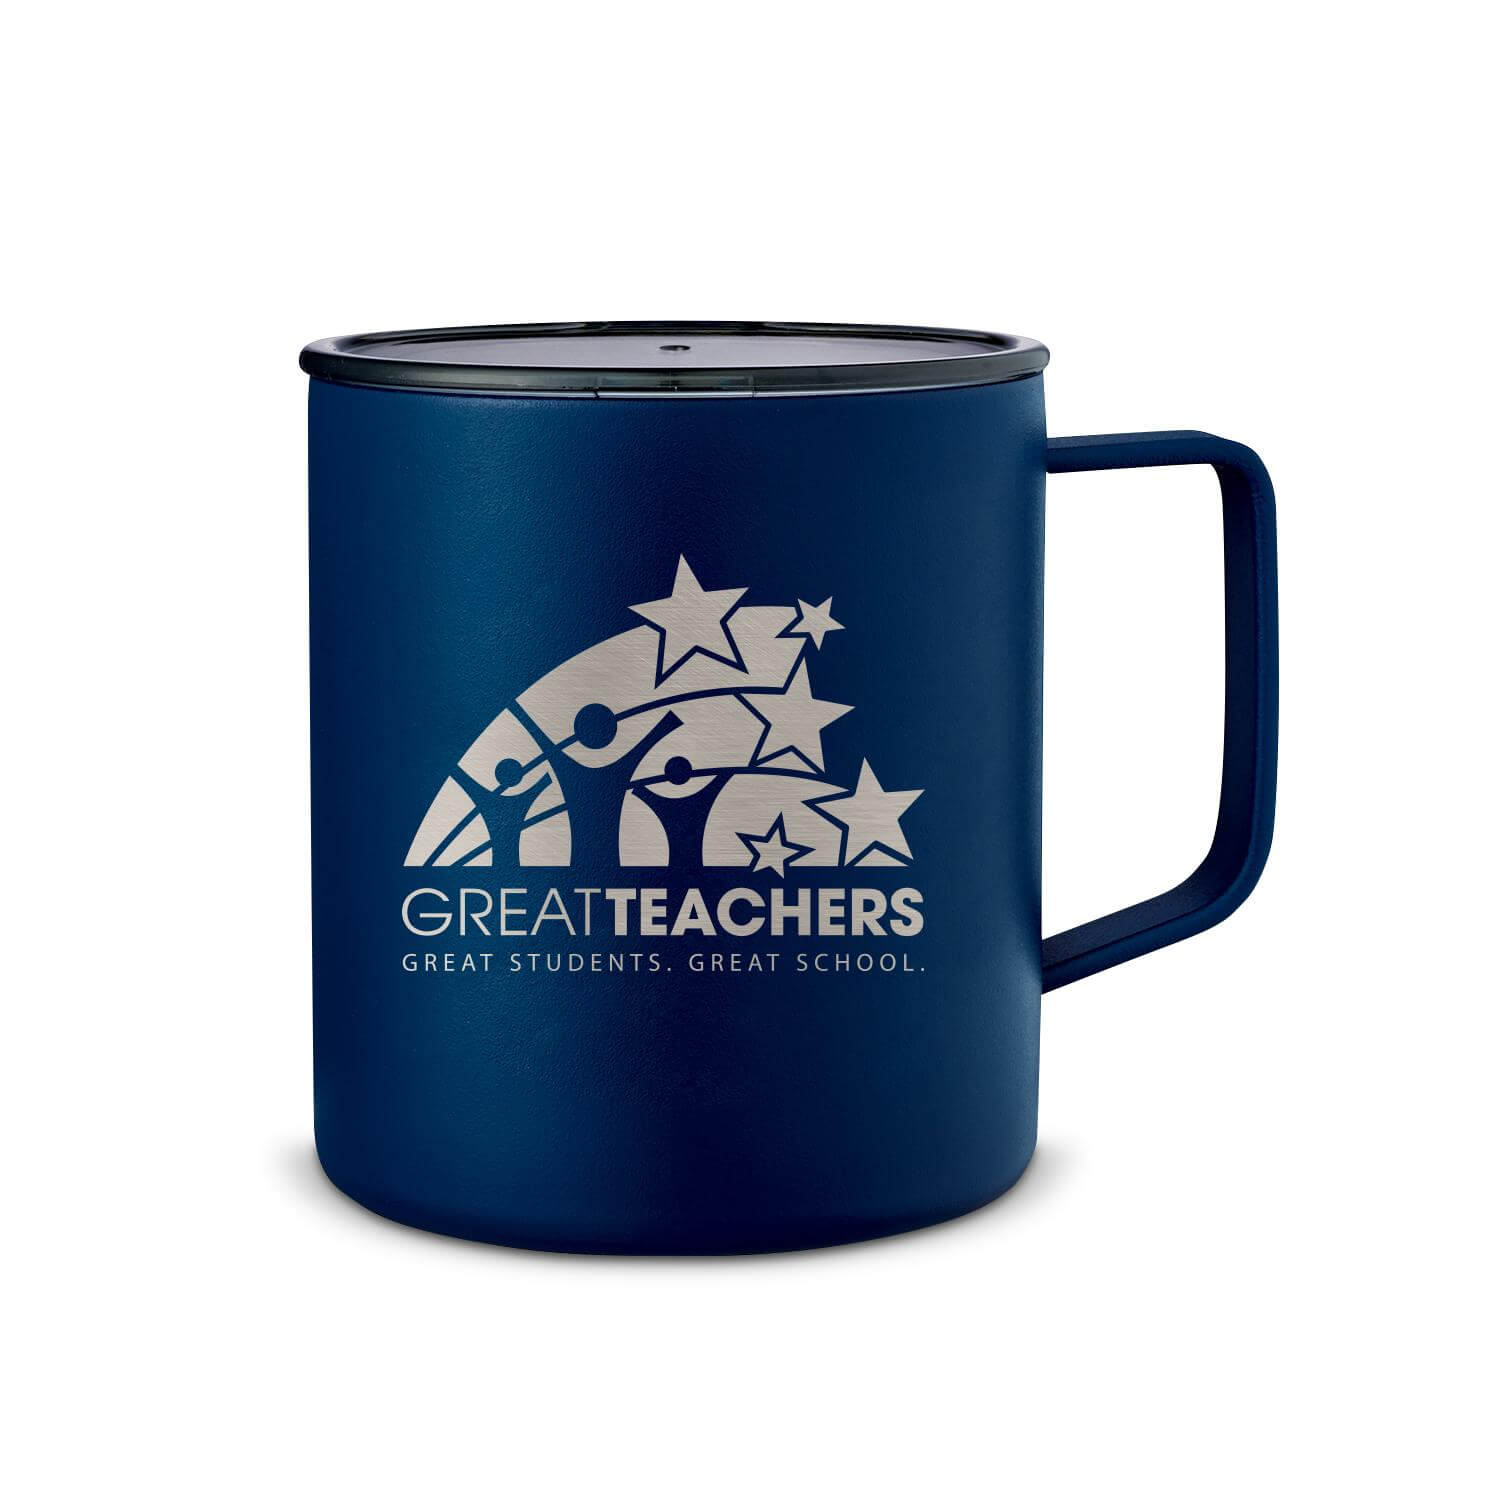 Personalized Gifts Are a Wonderful Way to Reward a Teacher's Hard Work